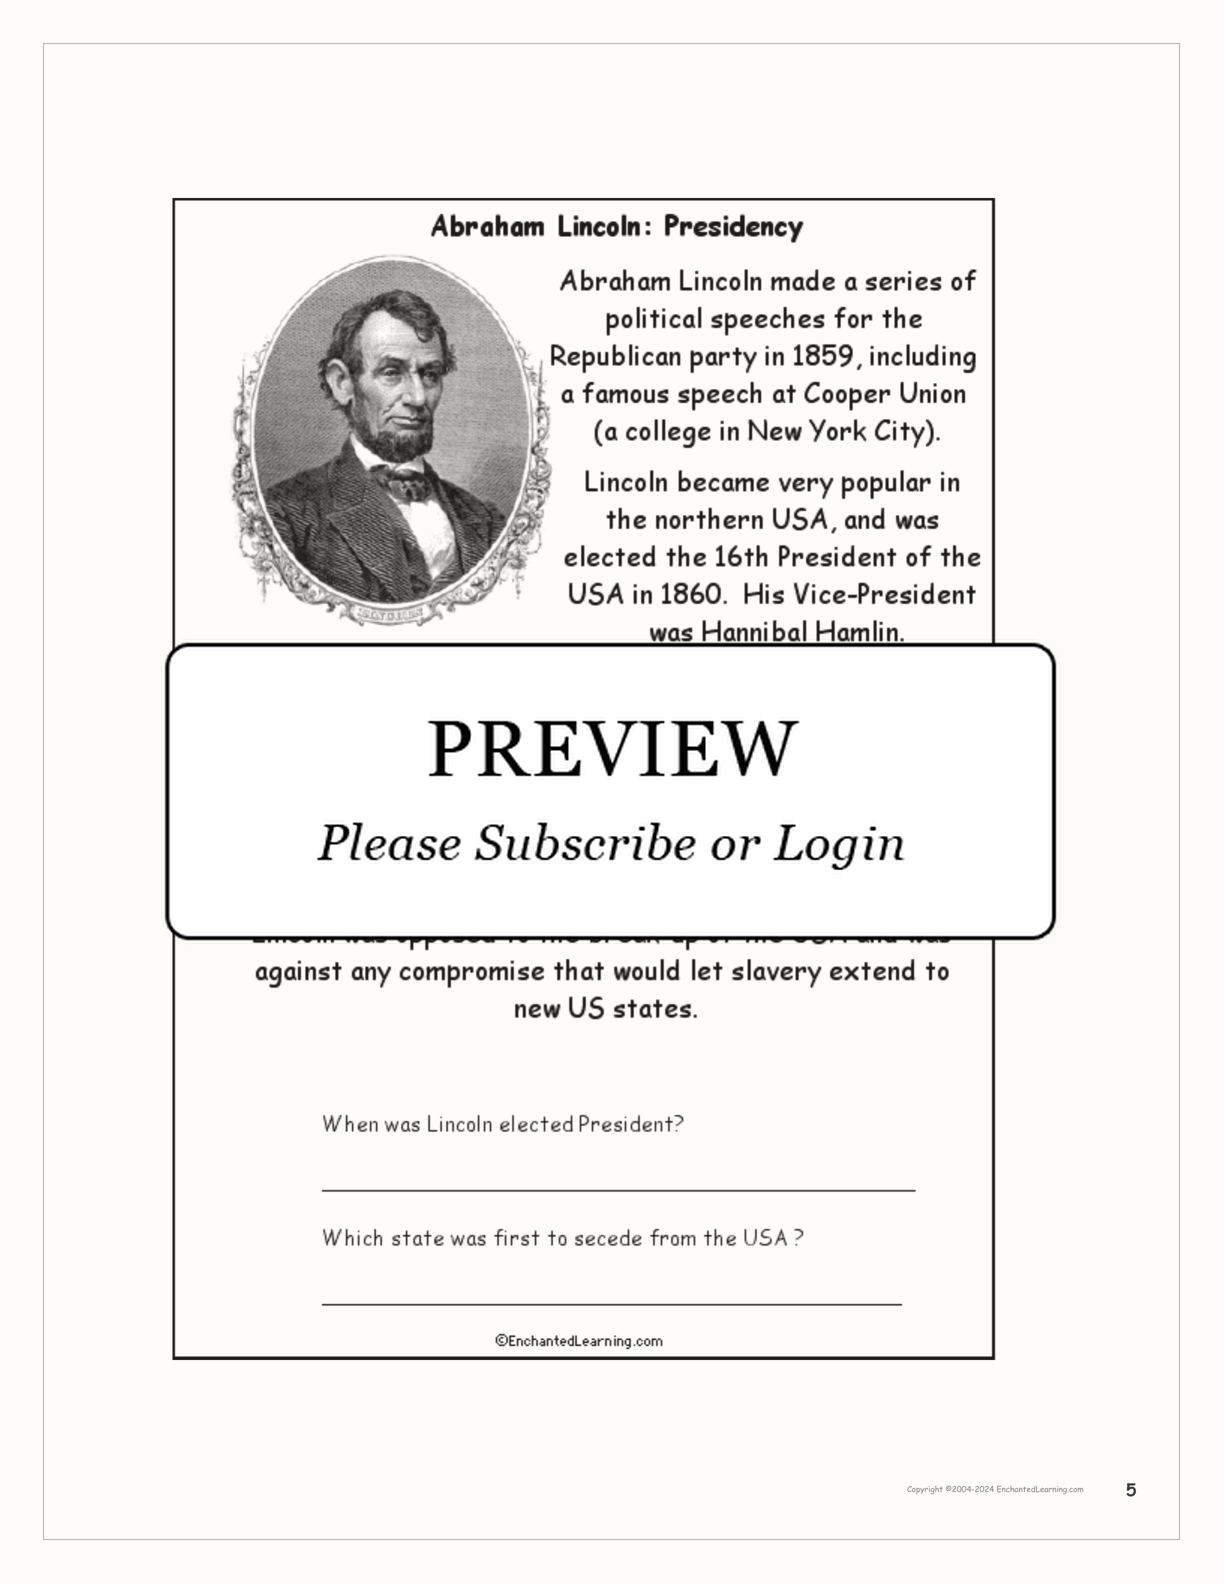 Abraham Lincoln Book interactive printout page 5